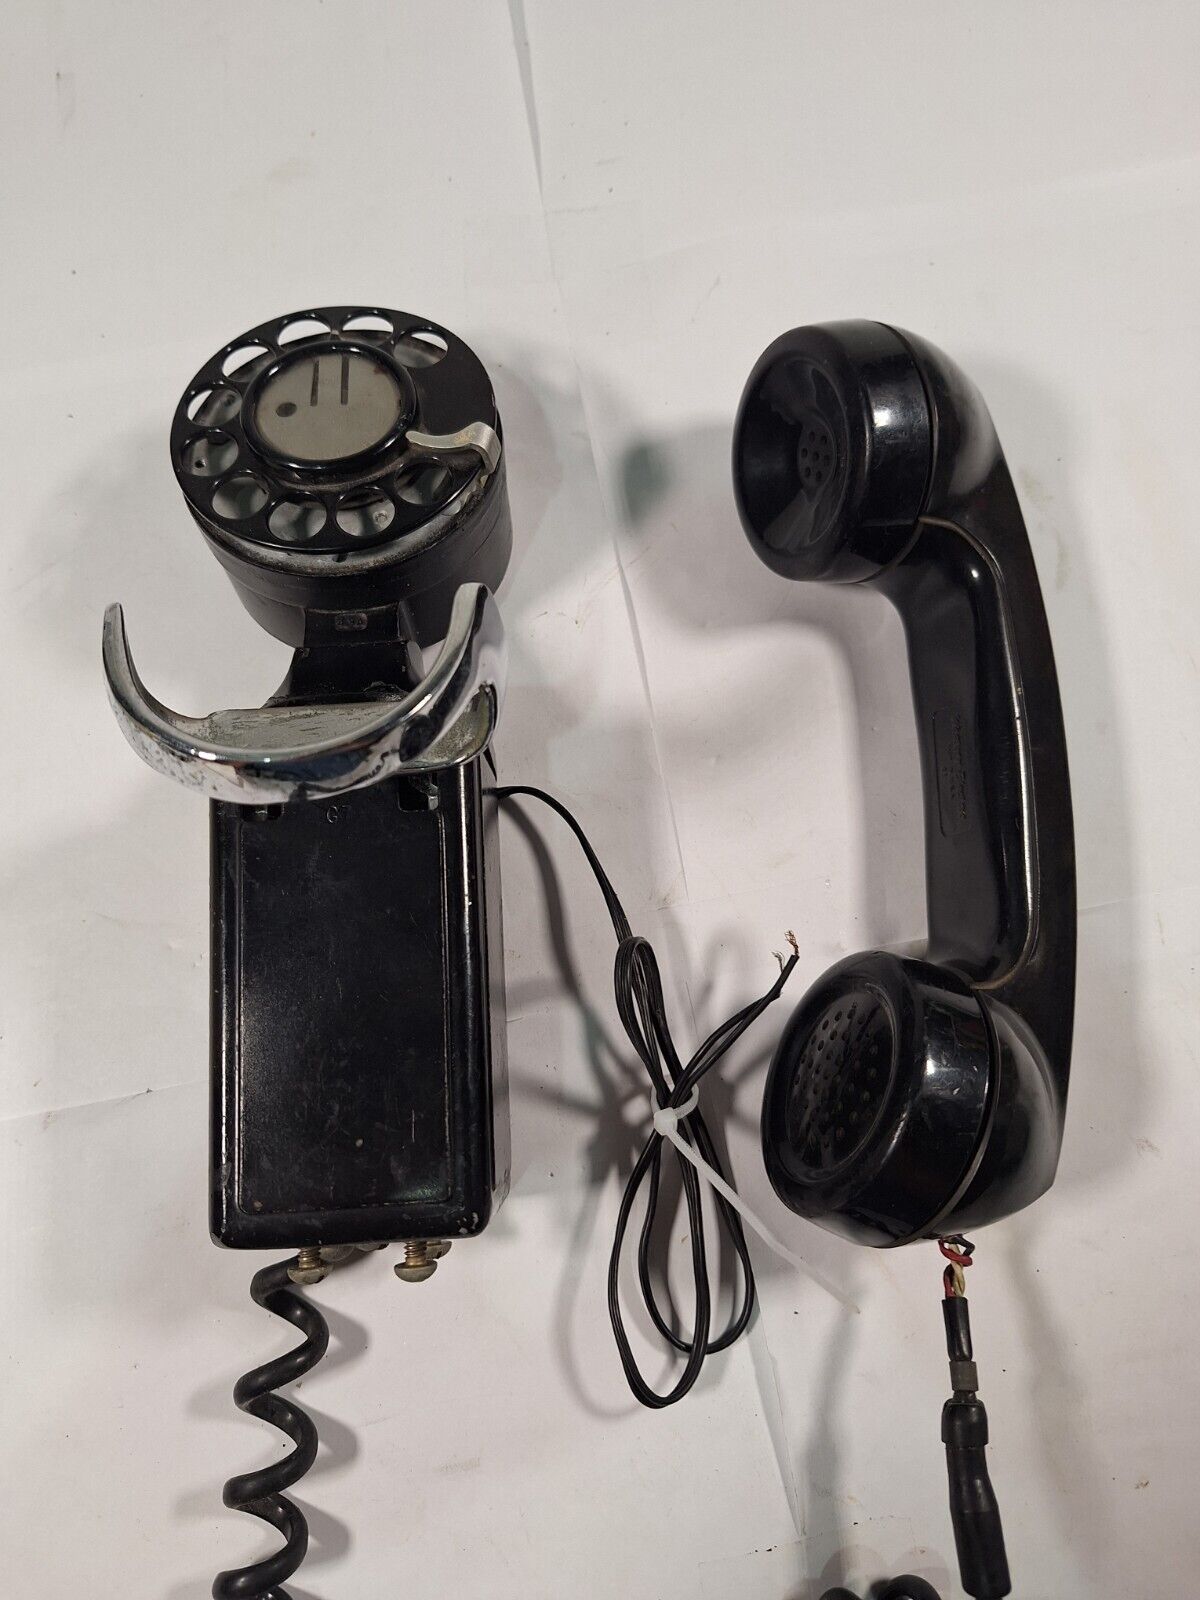 VINTAGE WESTERN ELECTRIC G1 43A SPACE SAVER BLACK ROTARY WALL PHONE